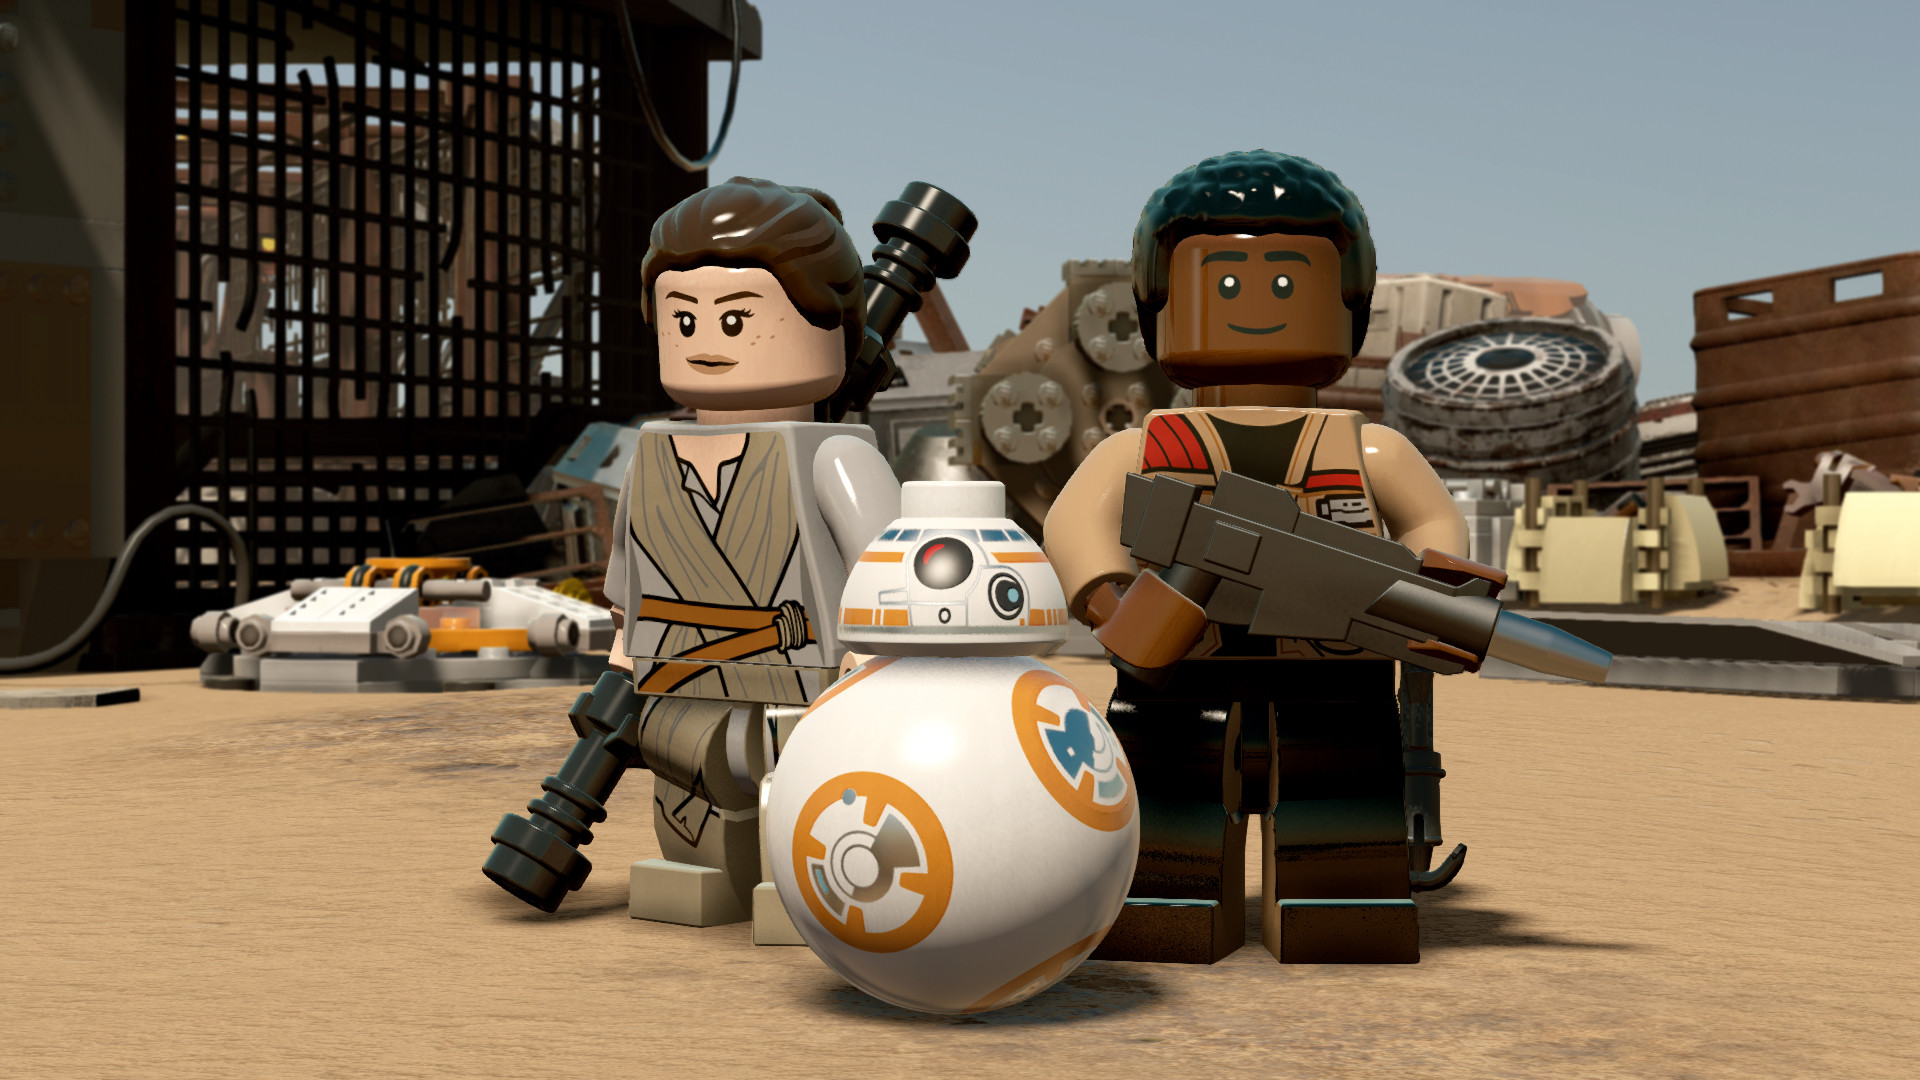 LEGO Star Wars: The Force Awakens Ultimate Edition Steam CD Key 16.94 $